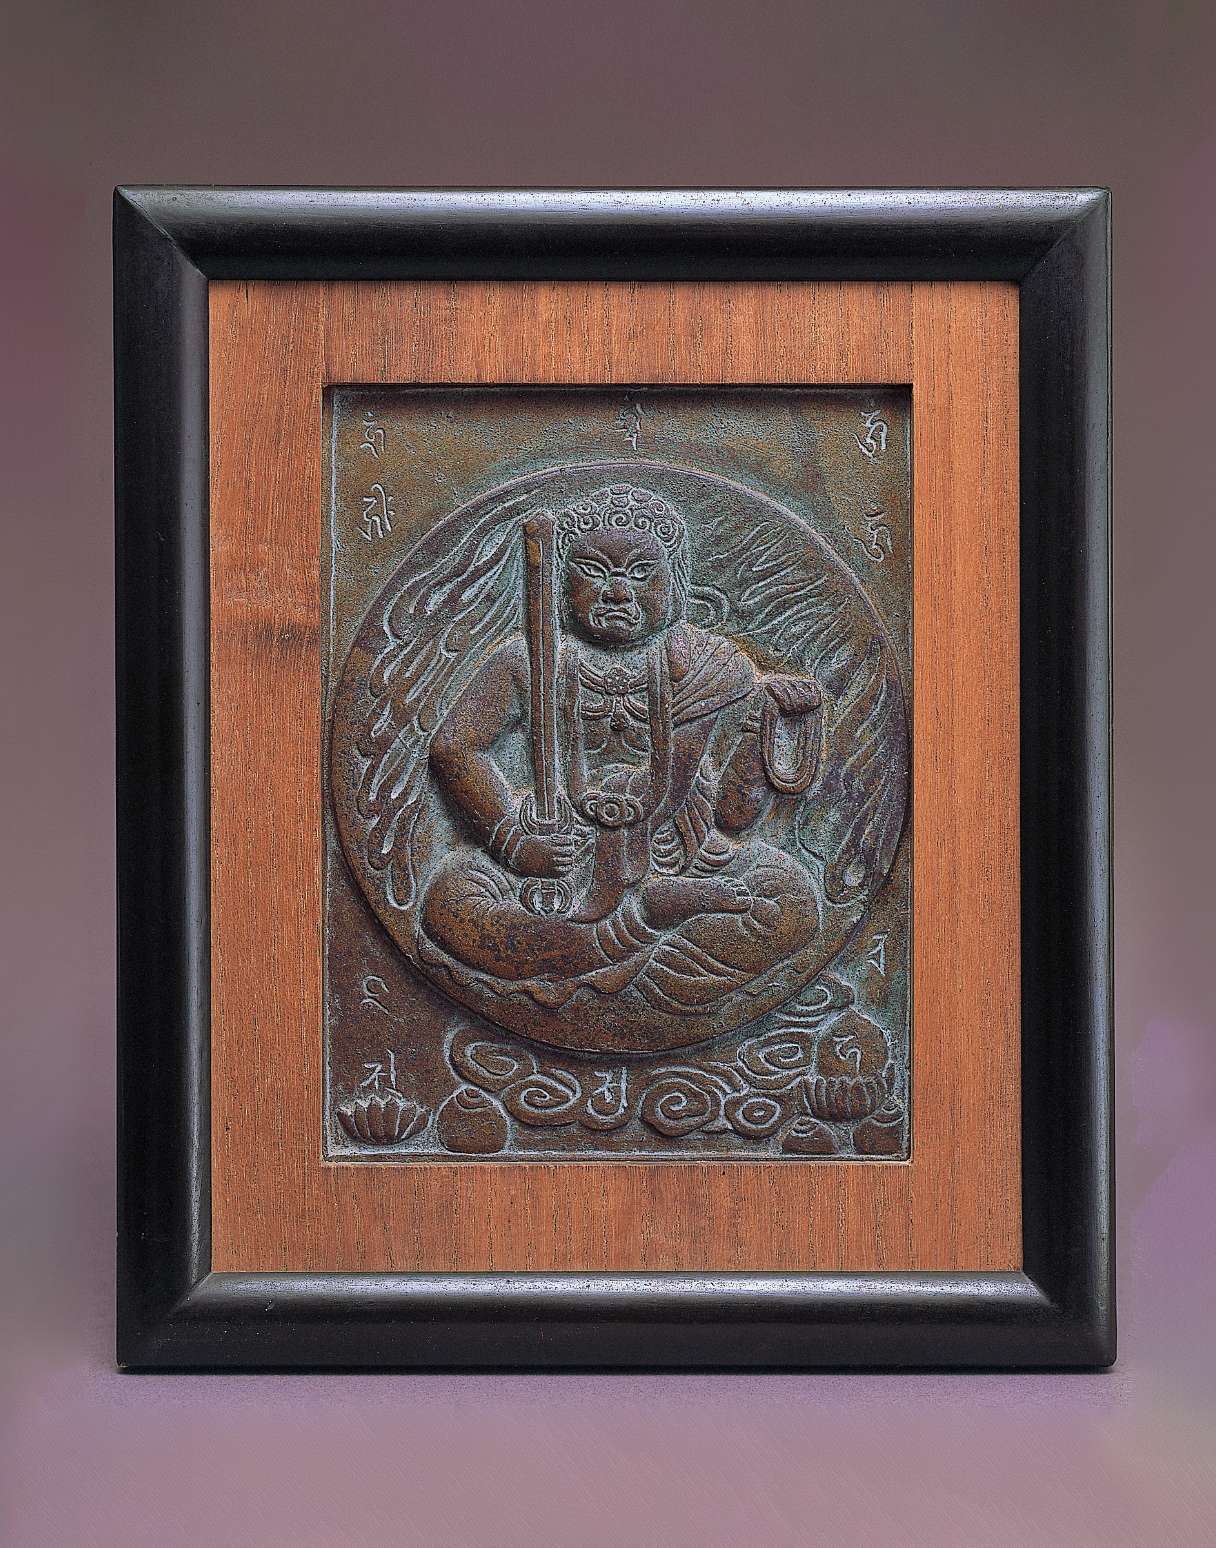 A dark, metallic relief of a scowling figure holding a sword in his right hand and a noose in the left, seated cross-legged, framed by a disc of stylized fire; letters of a mantra are etched nearby.